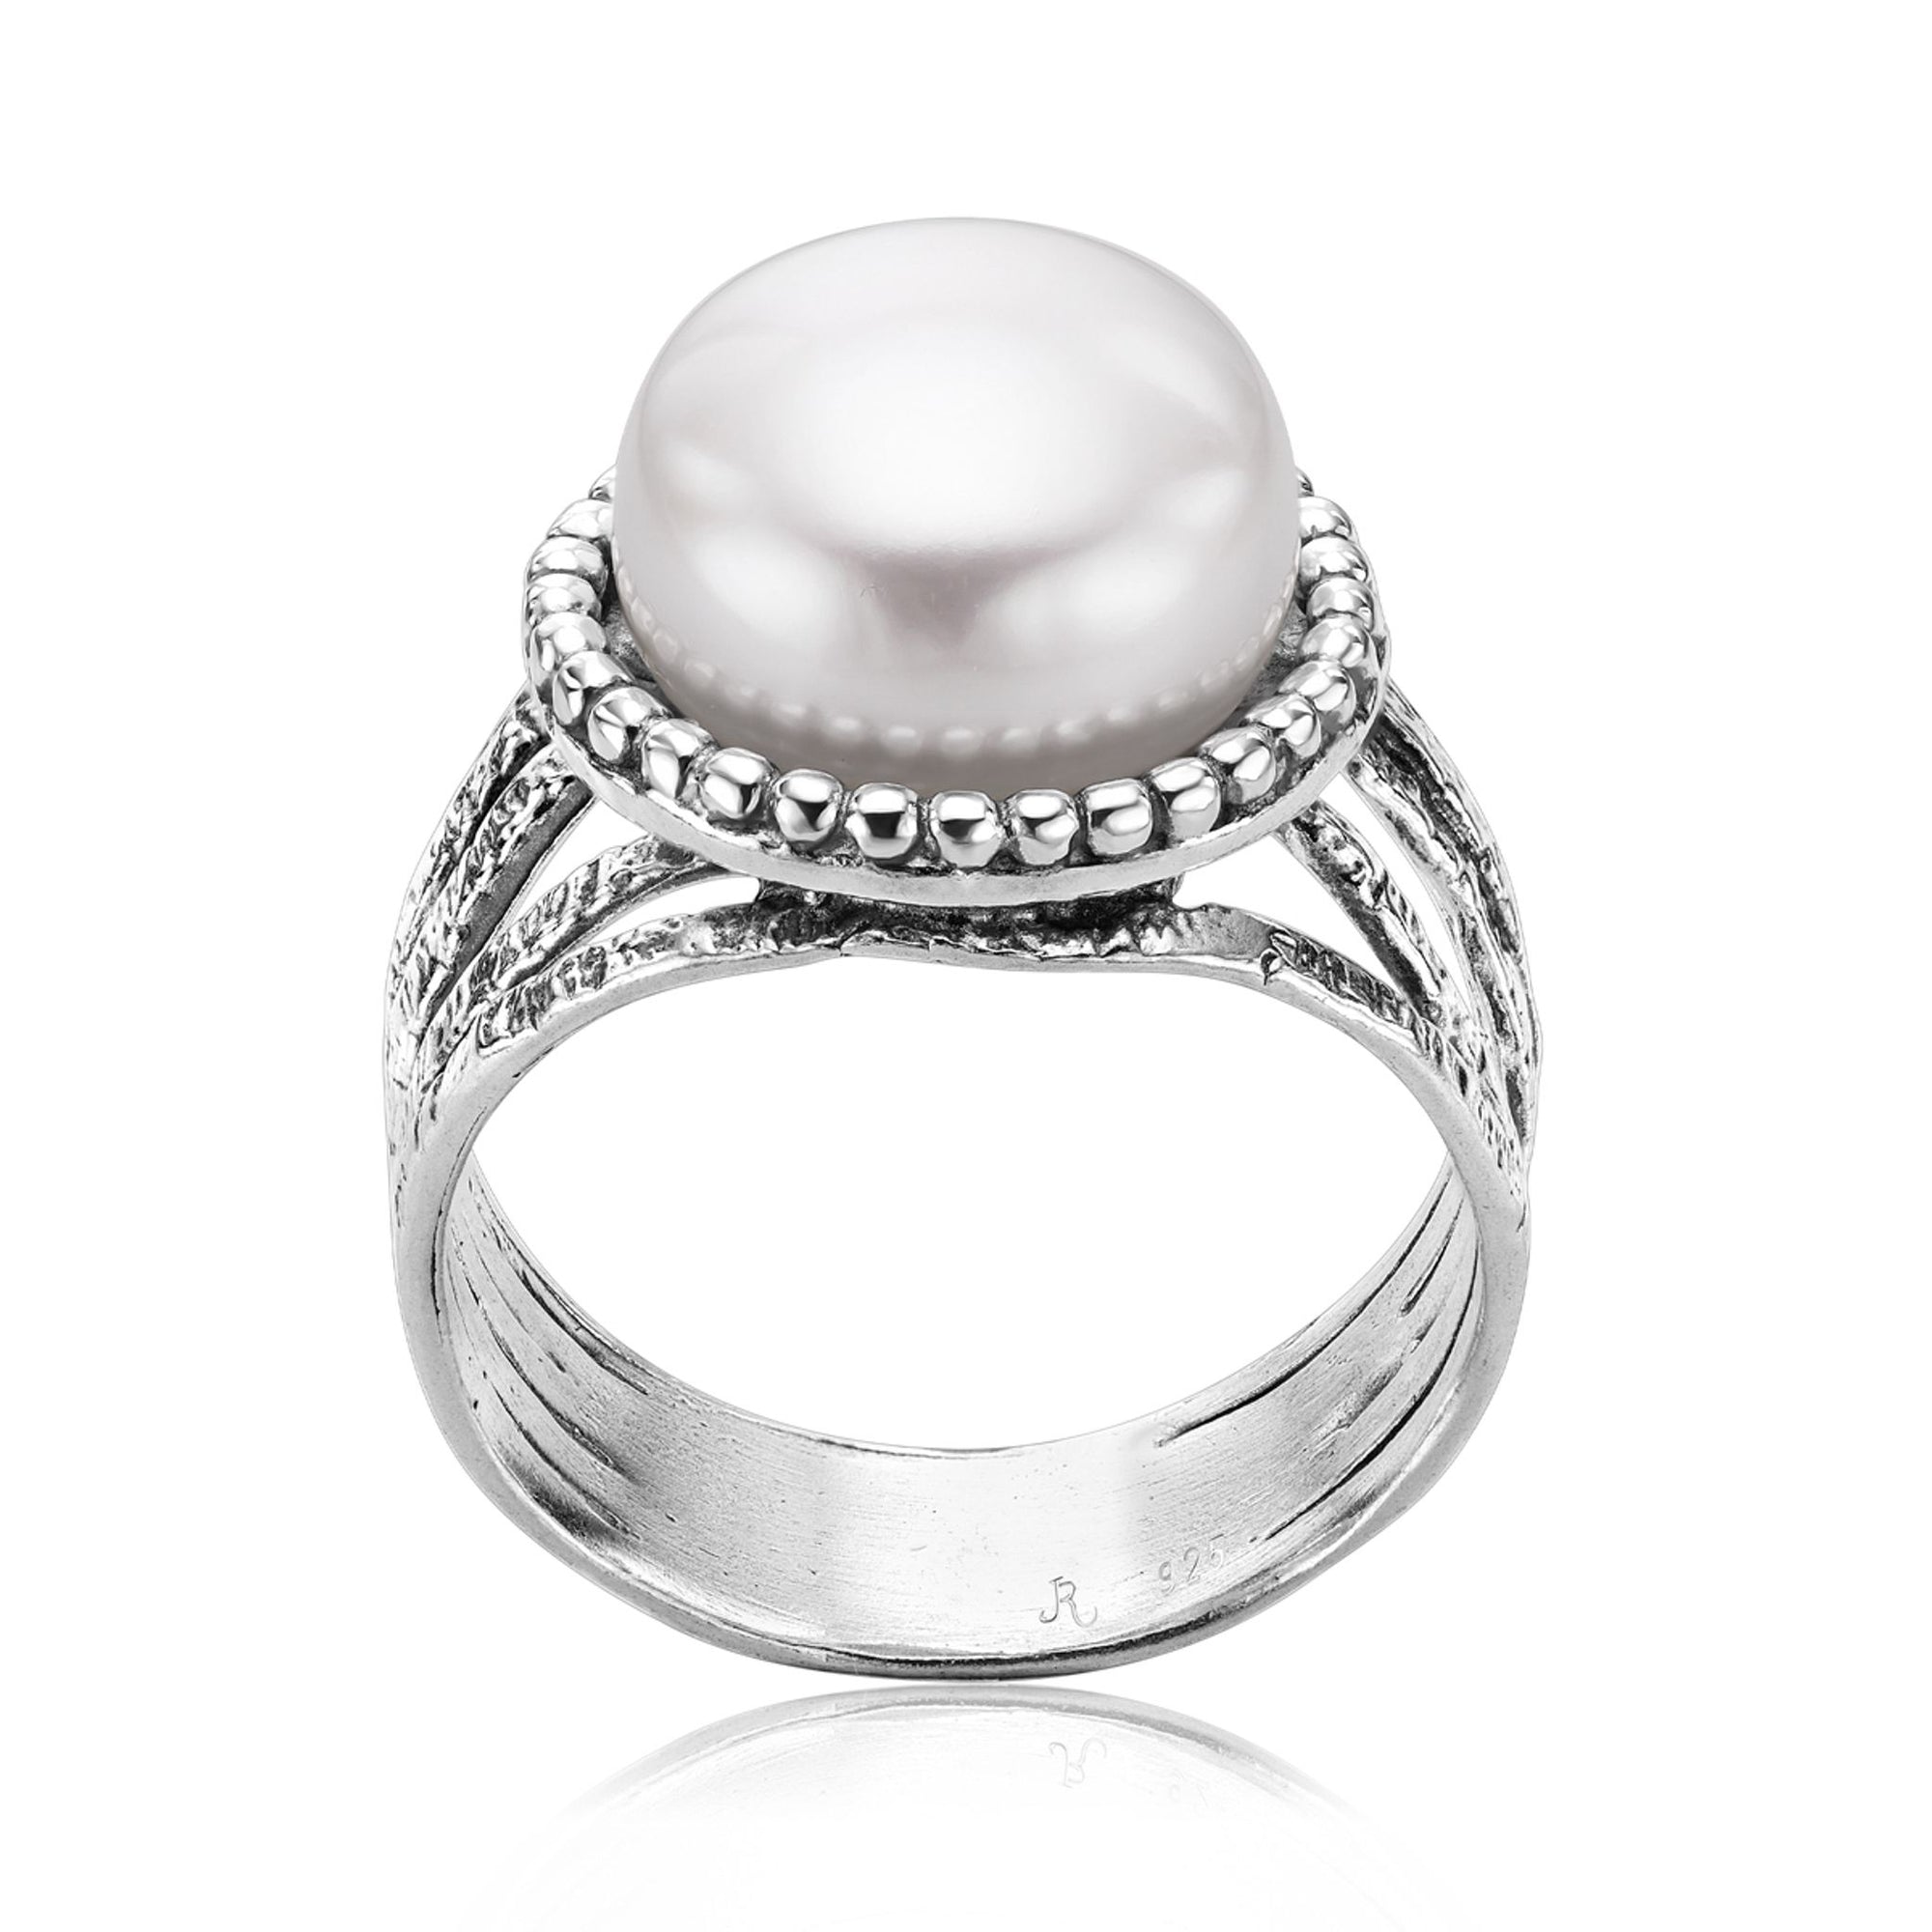 Multi Strand Sterling Silver Pearl Ring